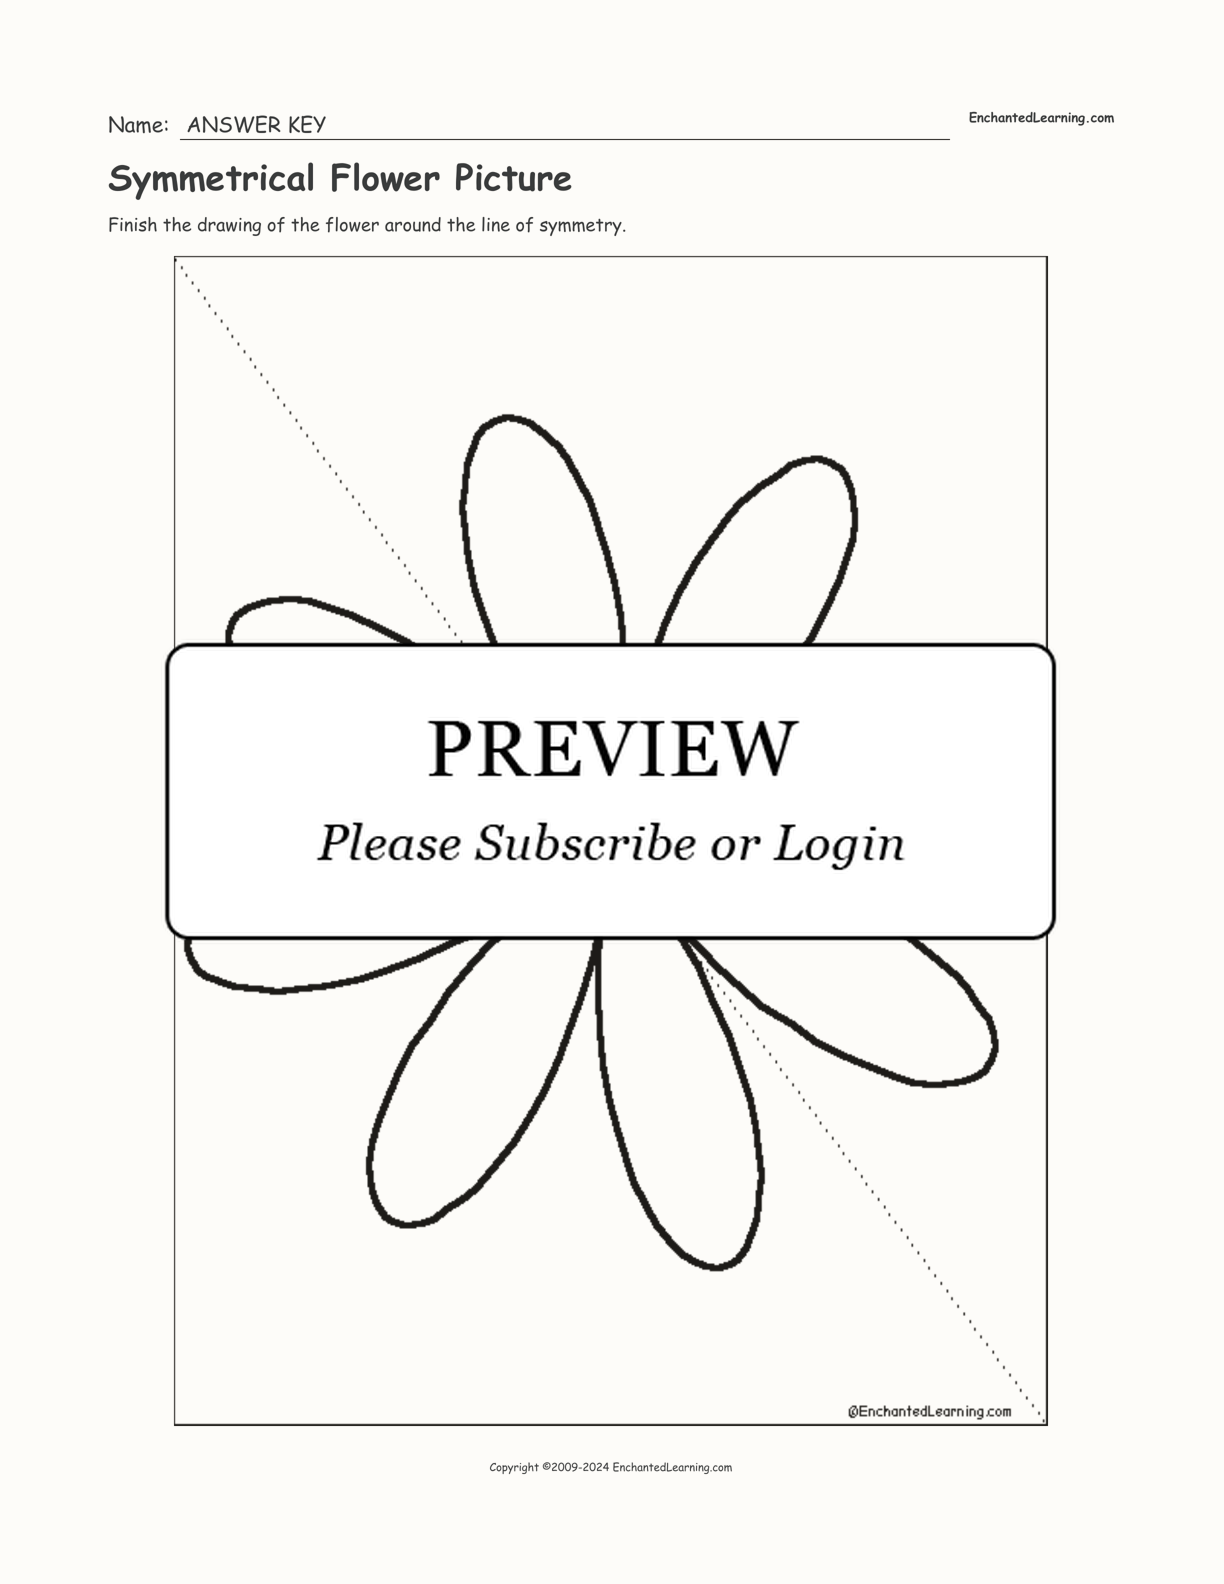 Symmetrical Flower Picture interactive worksheet page 2